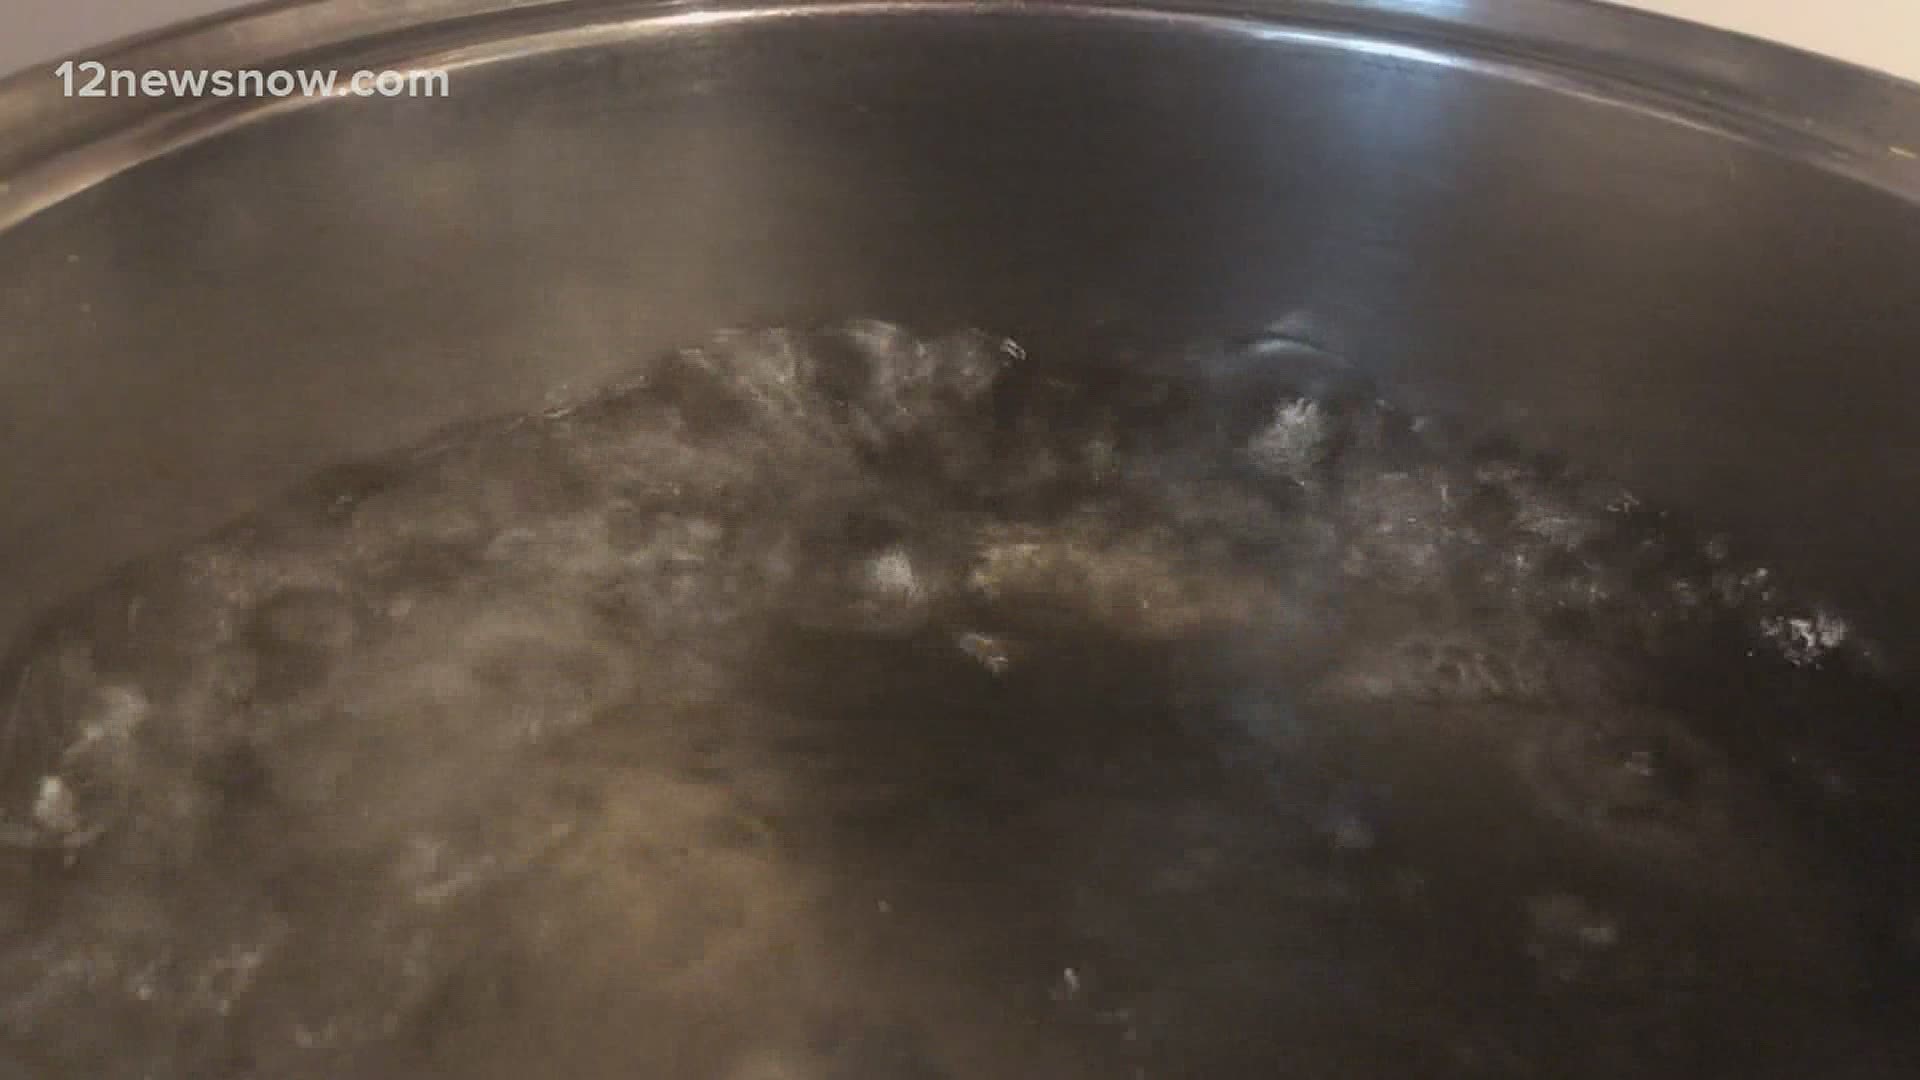 What does it mean to be under a boil water notice?